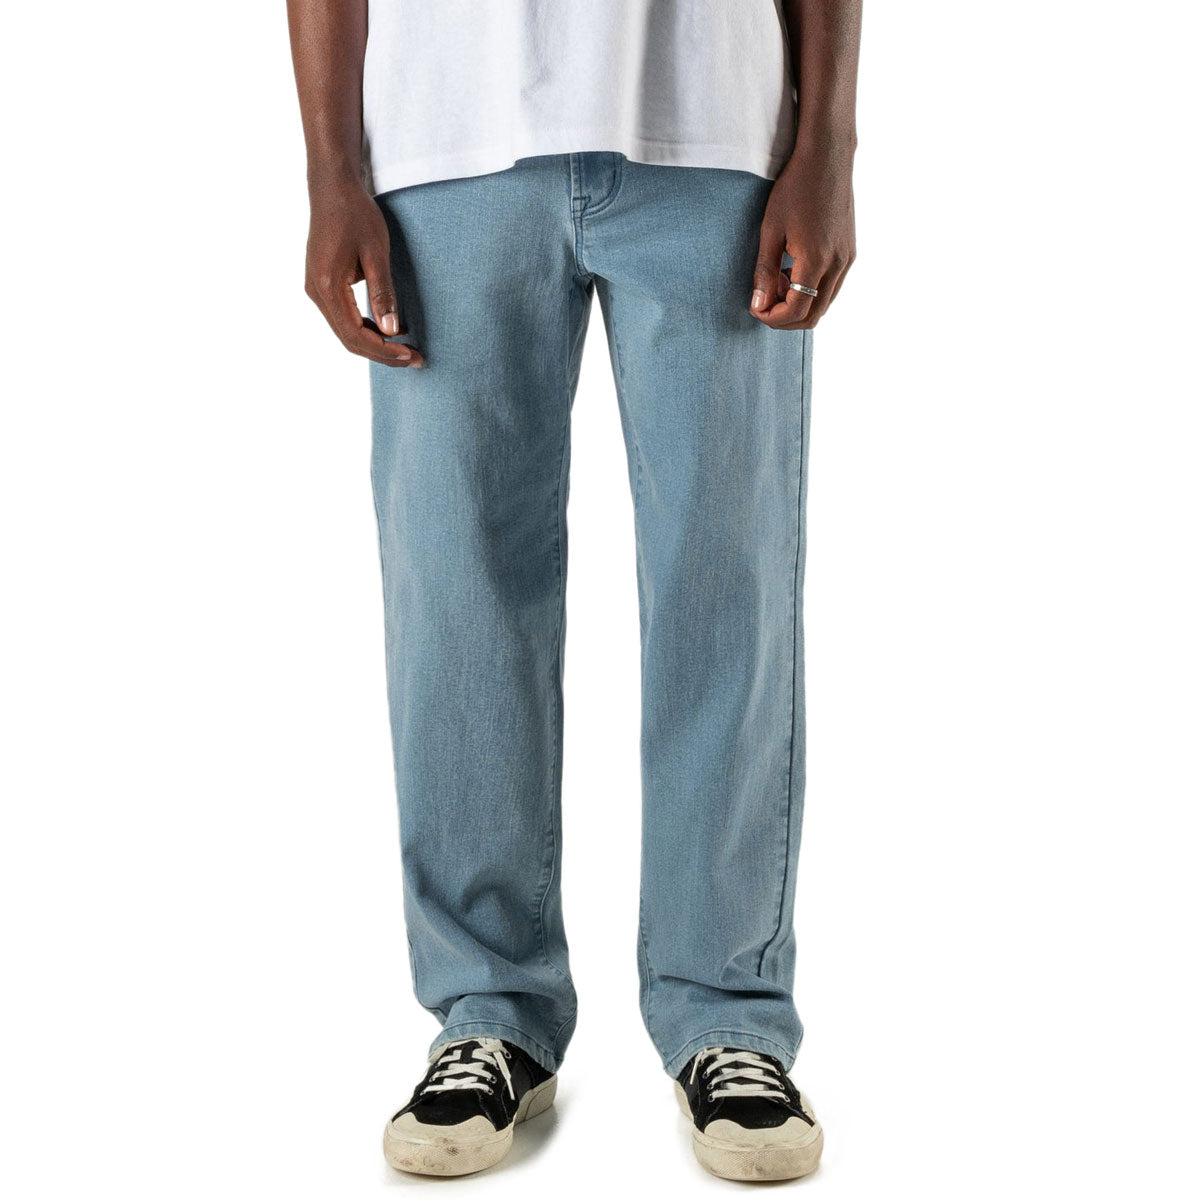 Former Crux Jeans - Blue Fade image 2